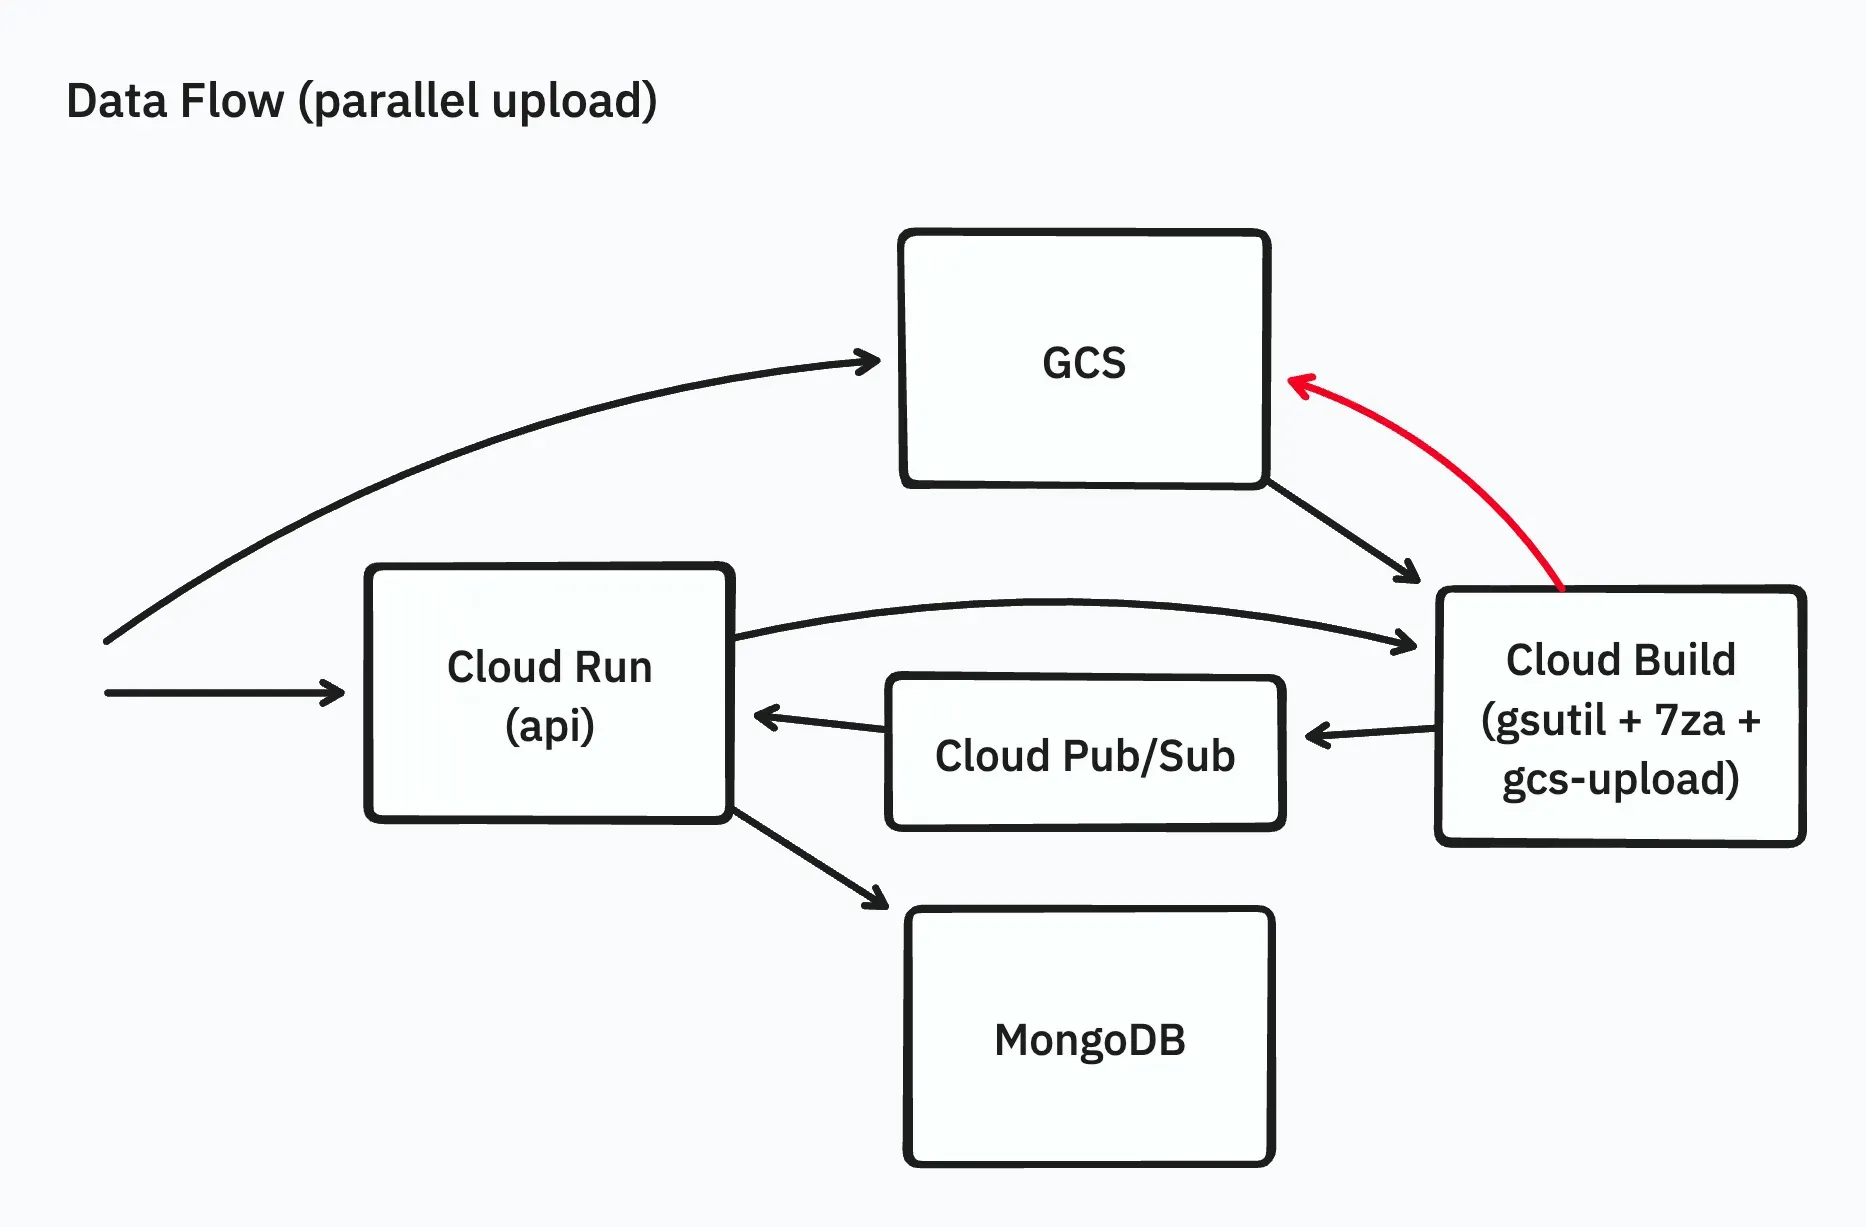 Optimization in the uploading part from worker to GCS.